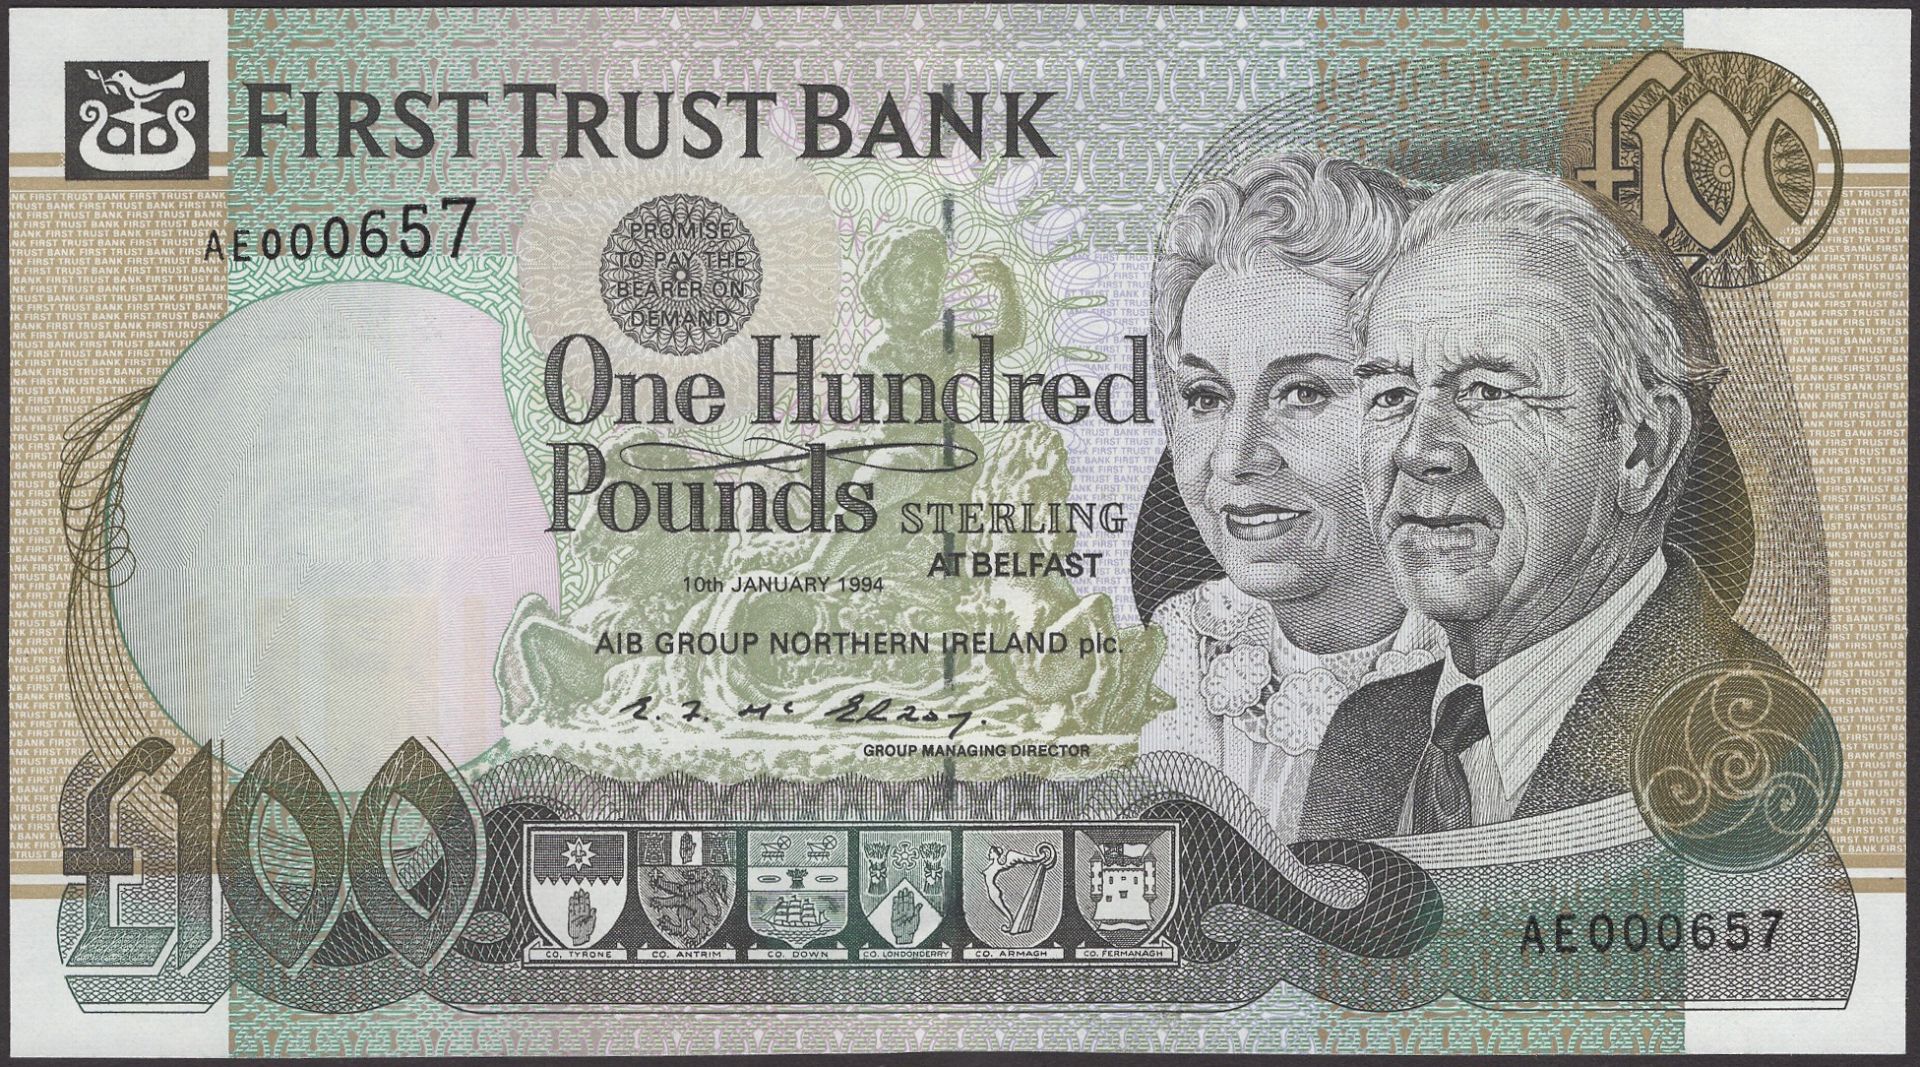 First Trust Bank, Â£100, 10 January 1994, serial number AE000657, McElroy signature, uncircul...